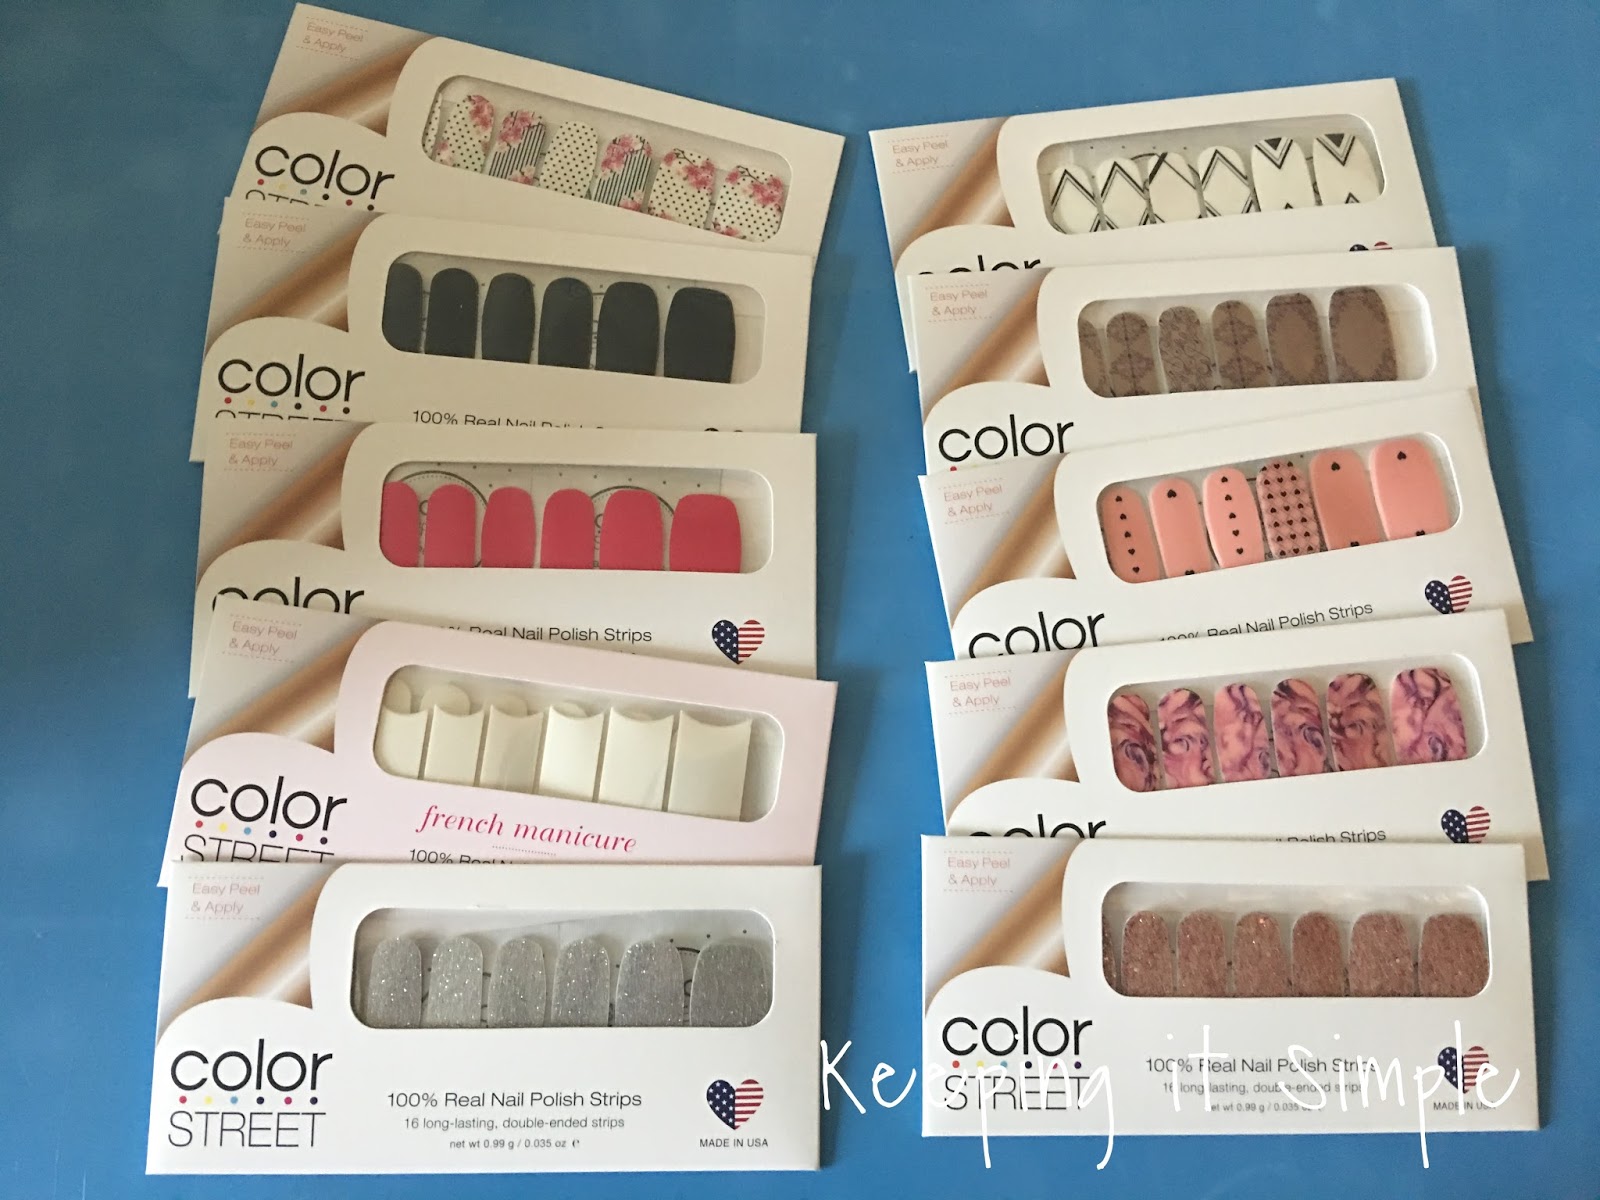 5. Color Street Nail Strips - wide 4